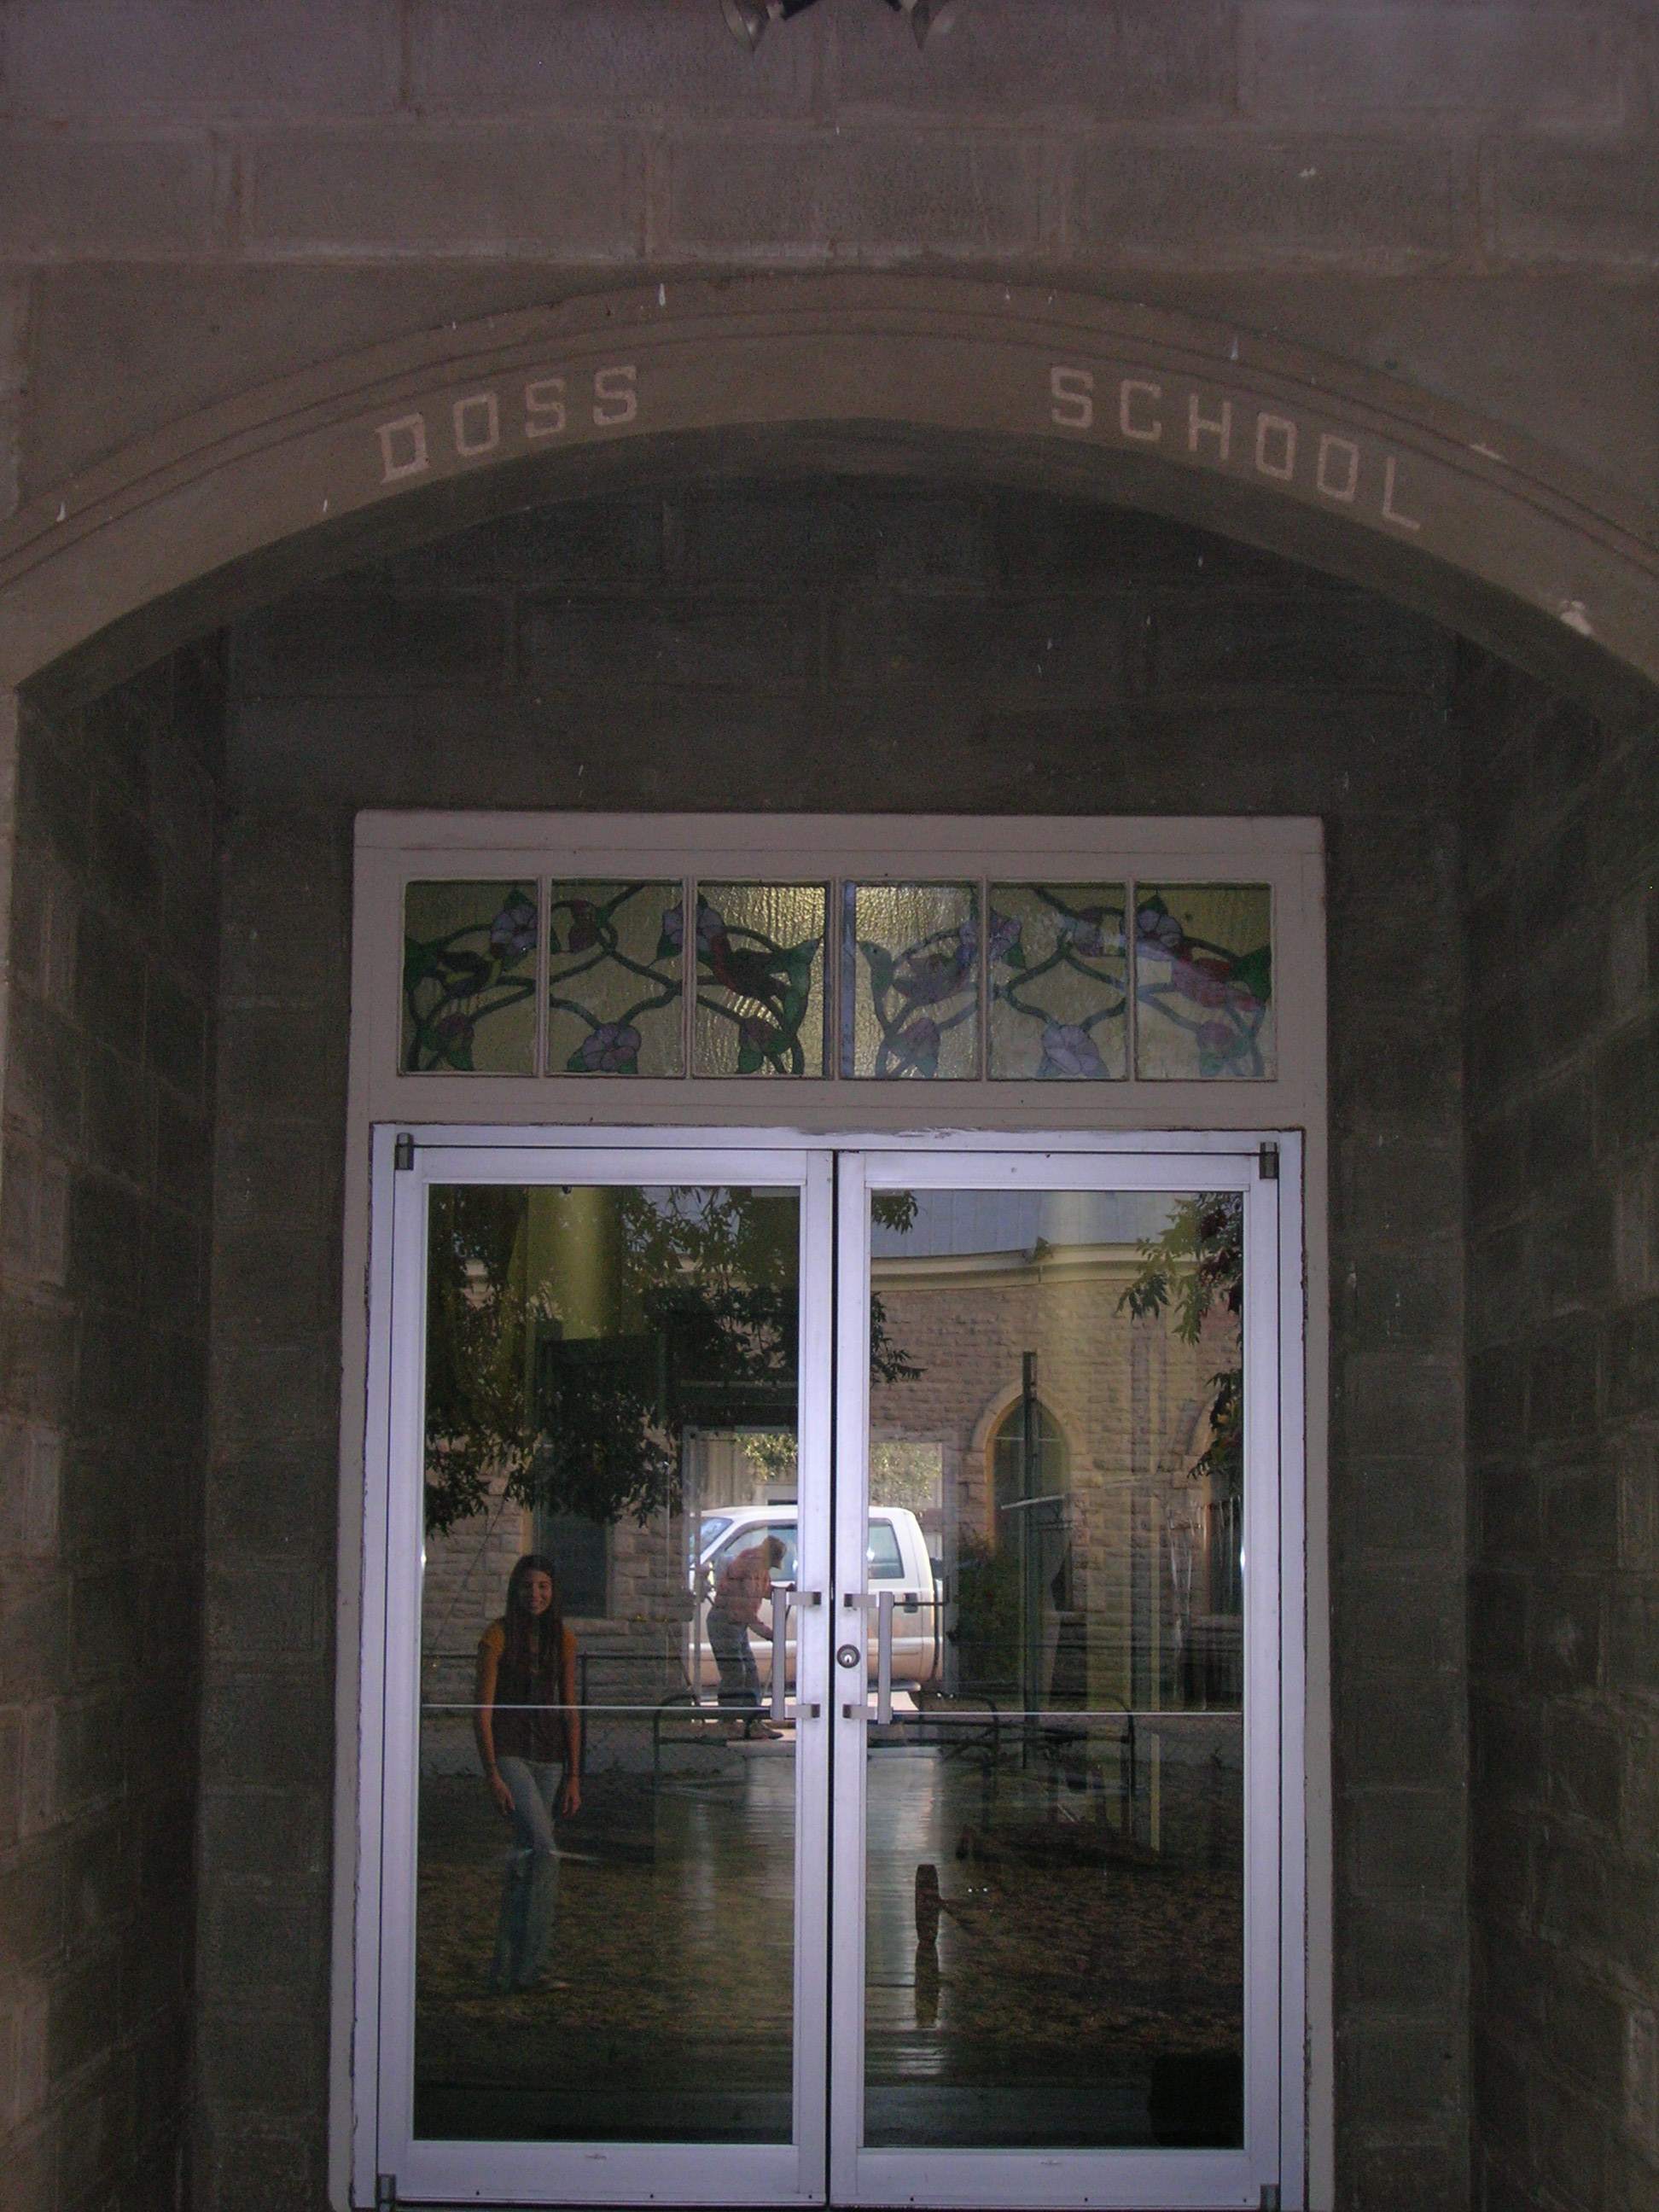 Current Doss School Front View